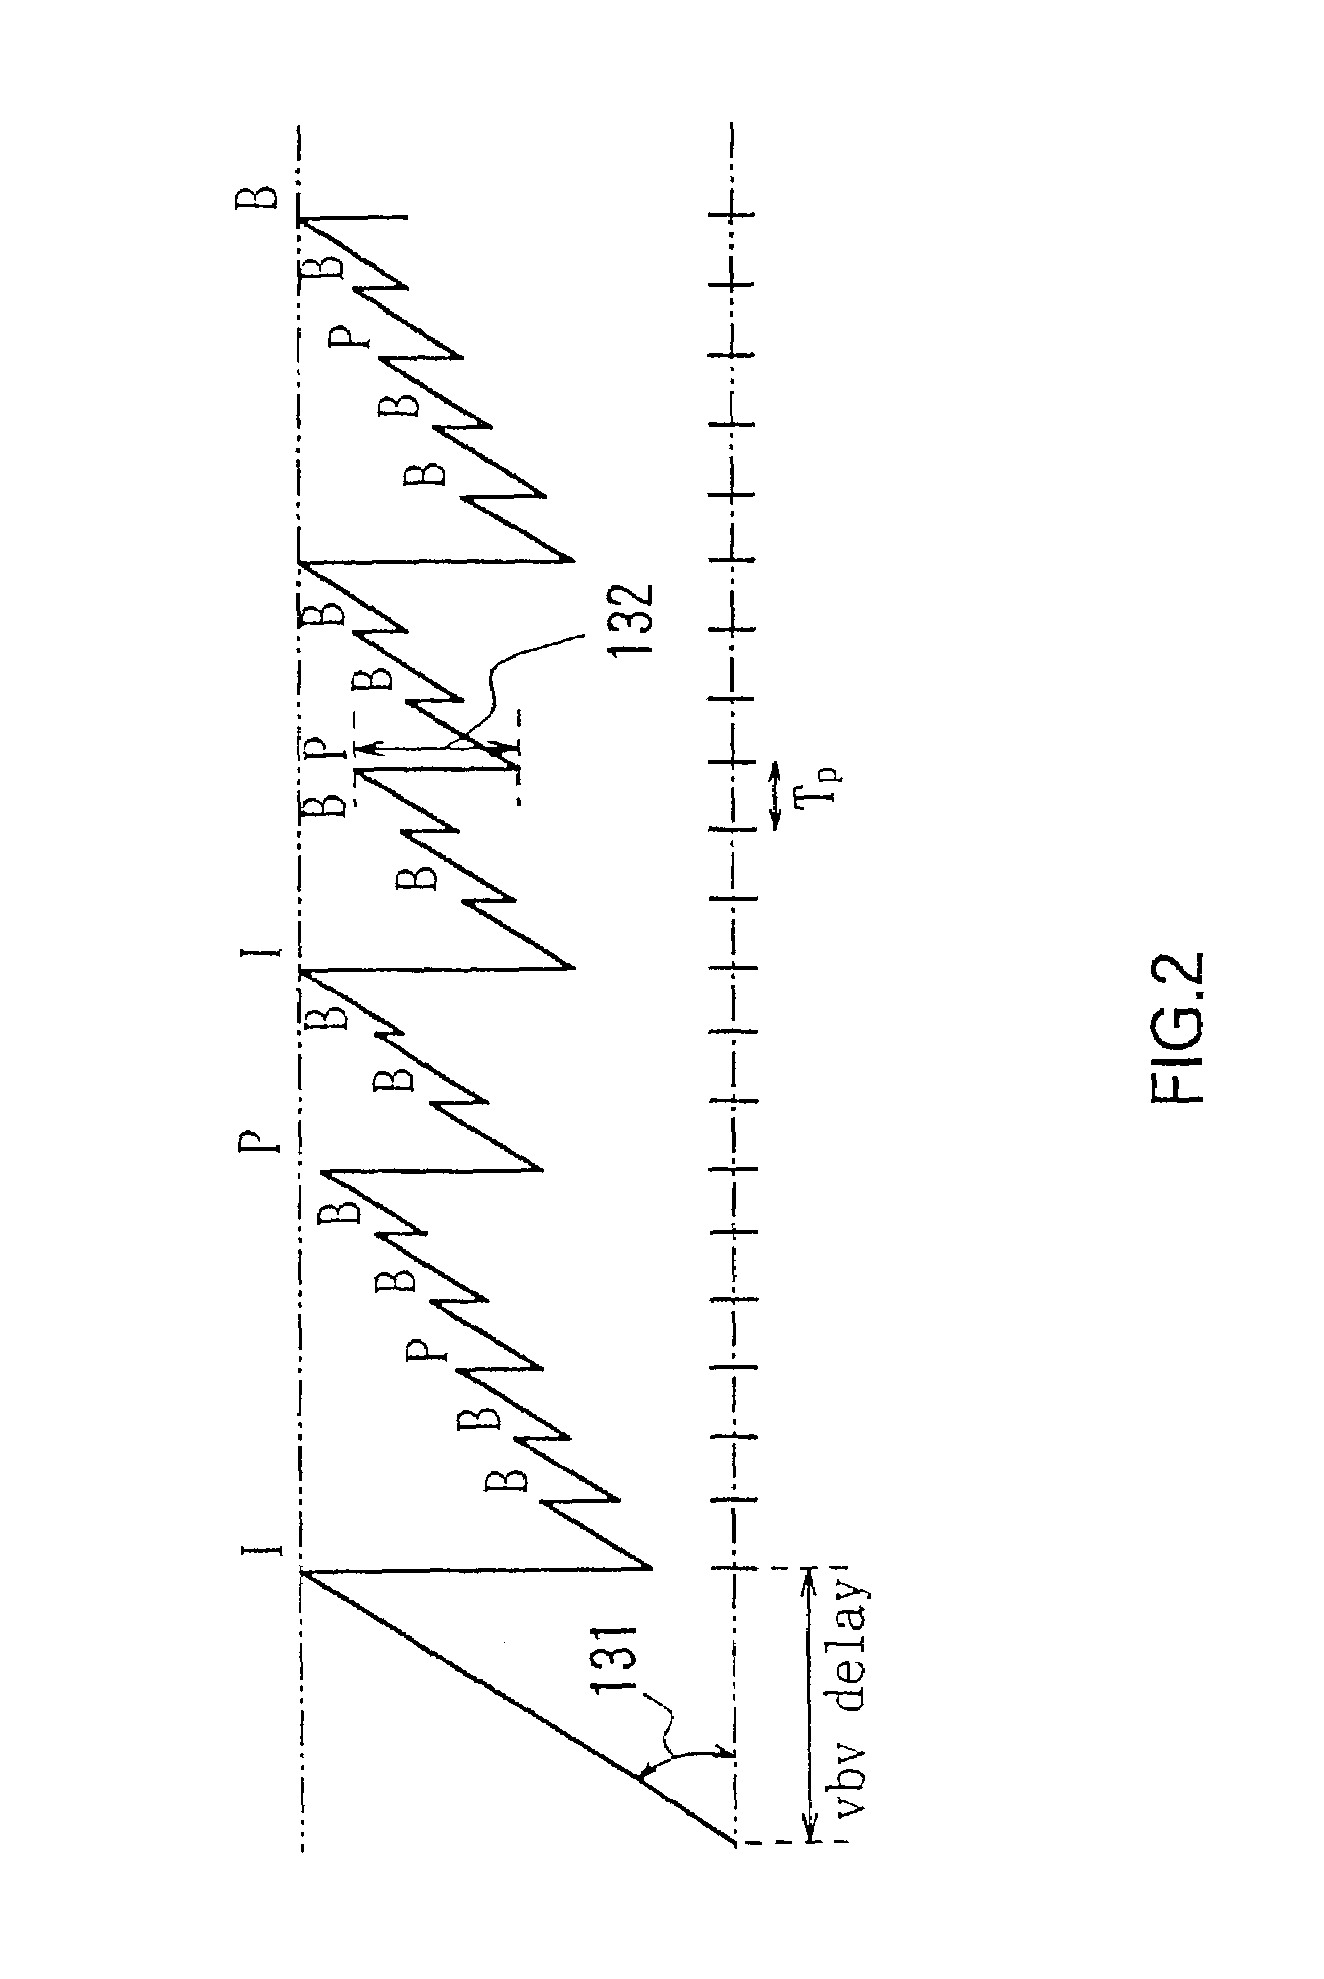 System method and apparatus for seamlessly splicing data